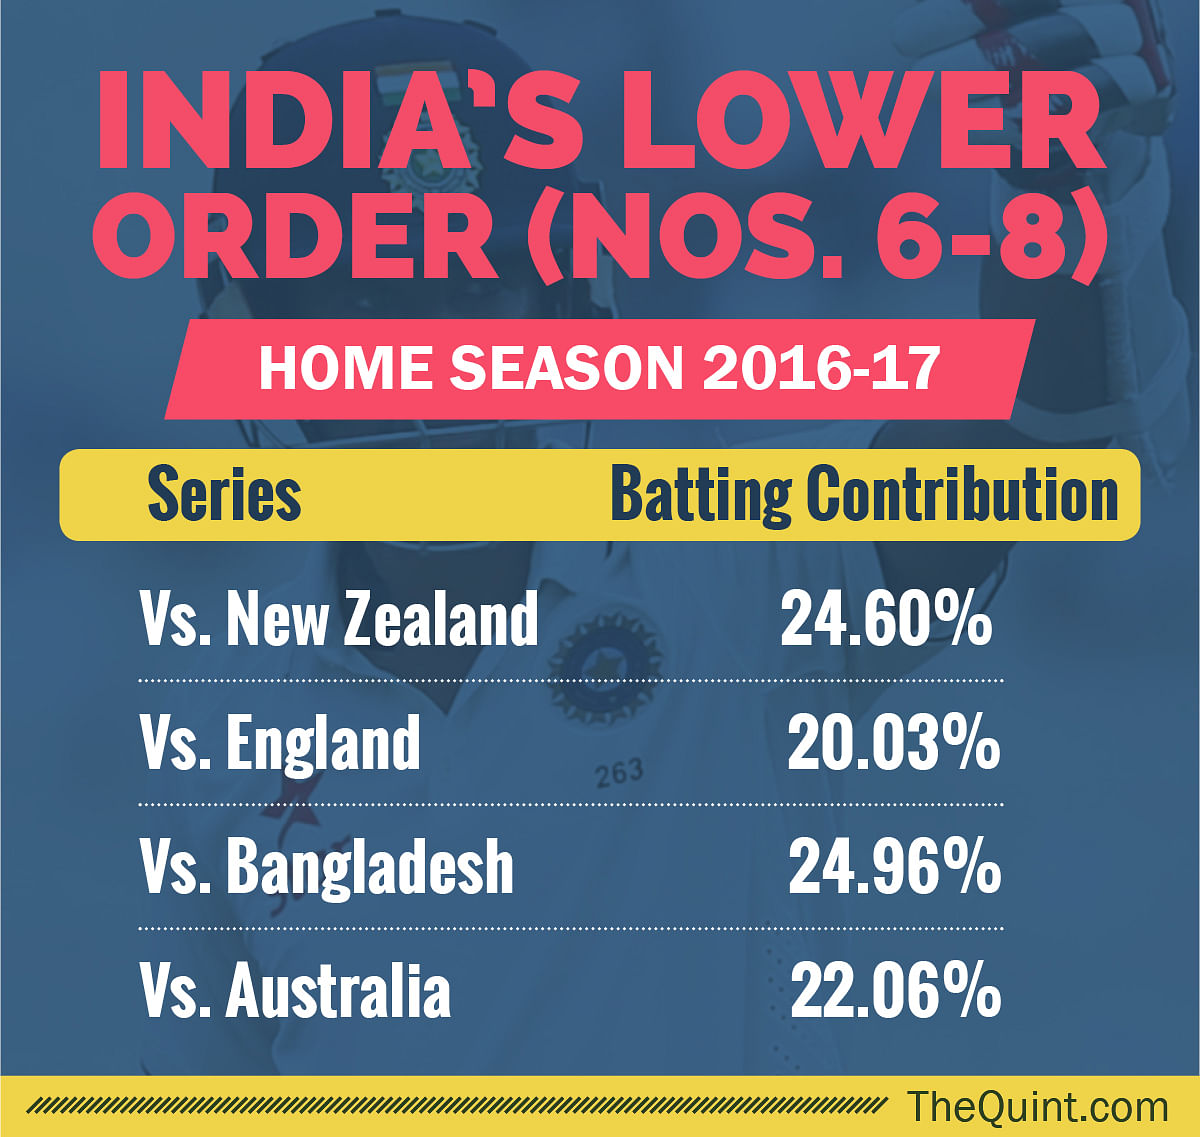 Statistician Arun Gopalakrishnan previews the 4th Test between India and Australia through some interesting numbers.